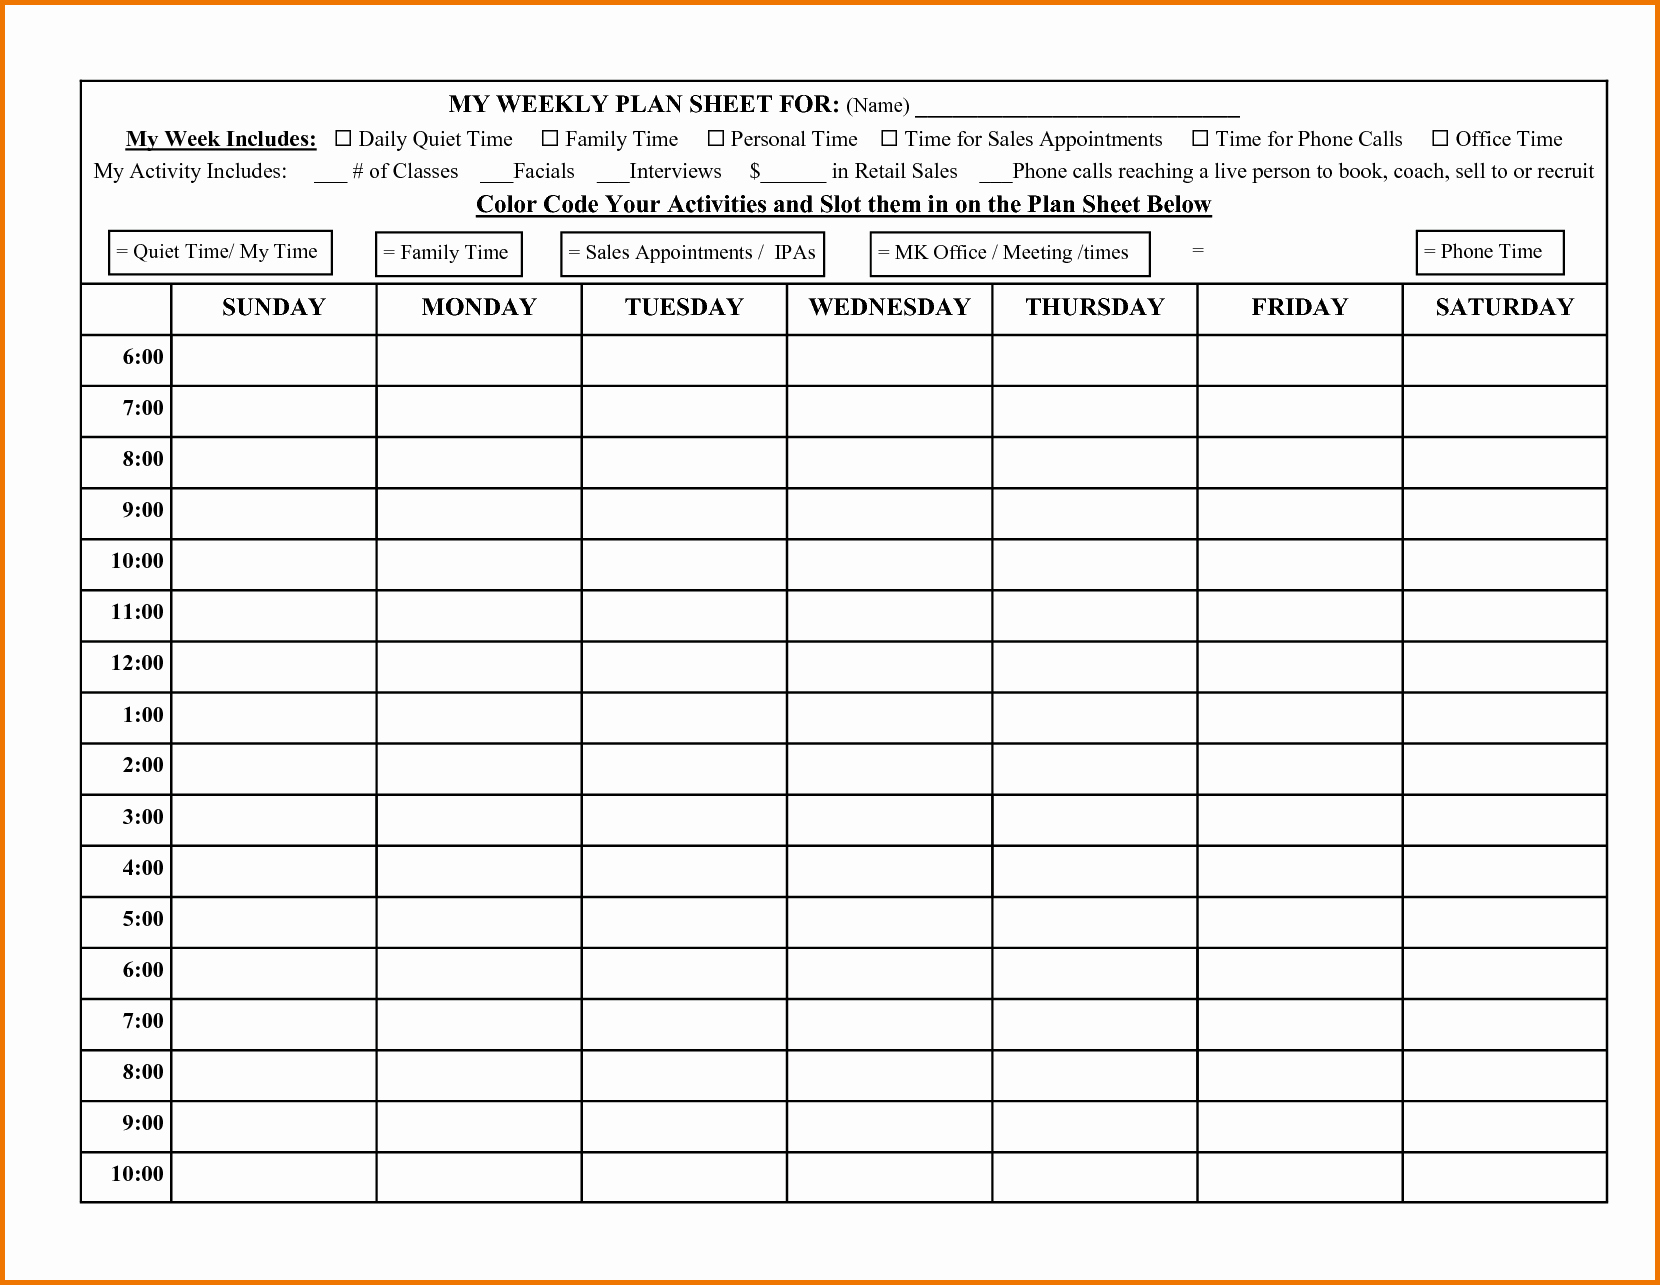 Sales Calls Report Template Fresh Daily Sales Call Report Template forms